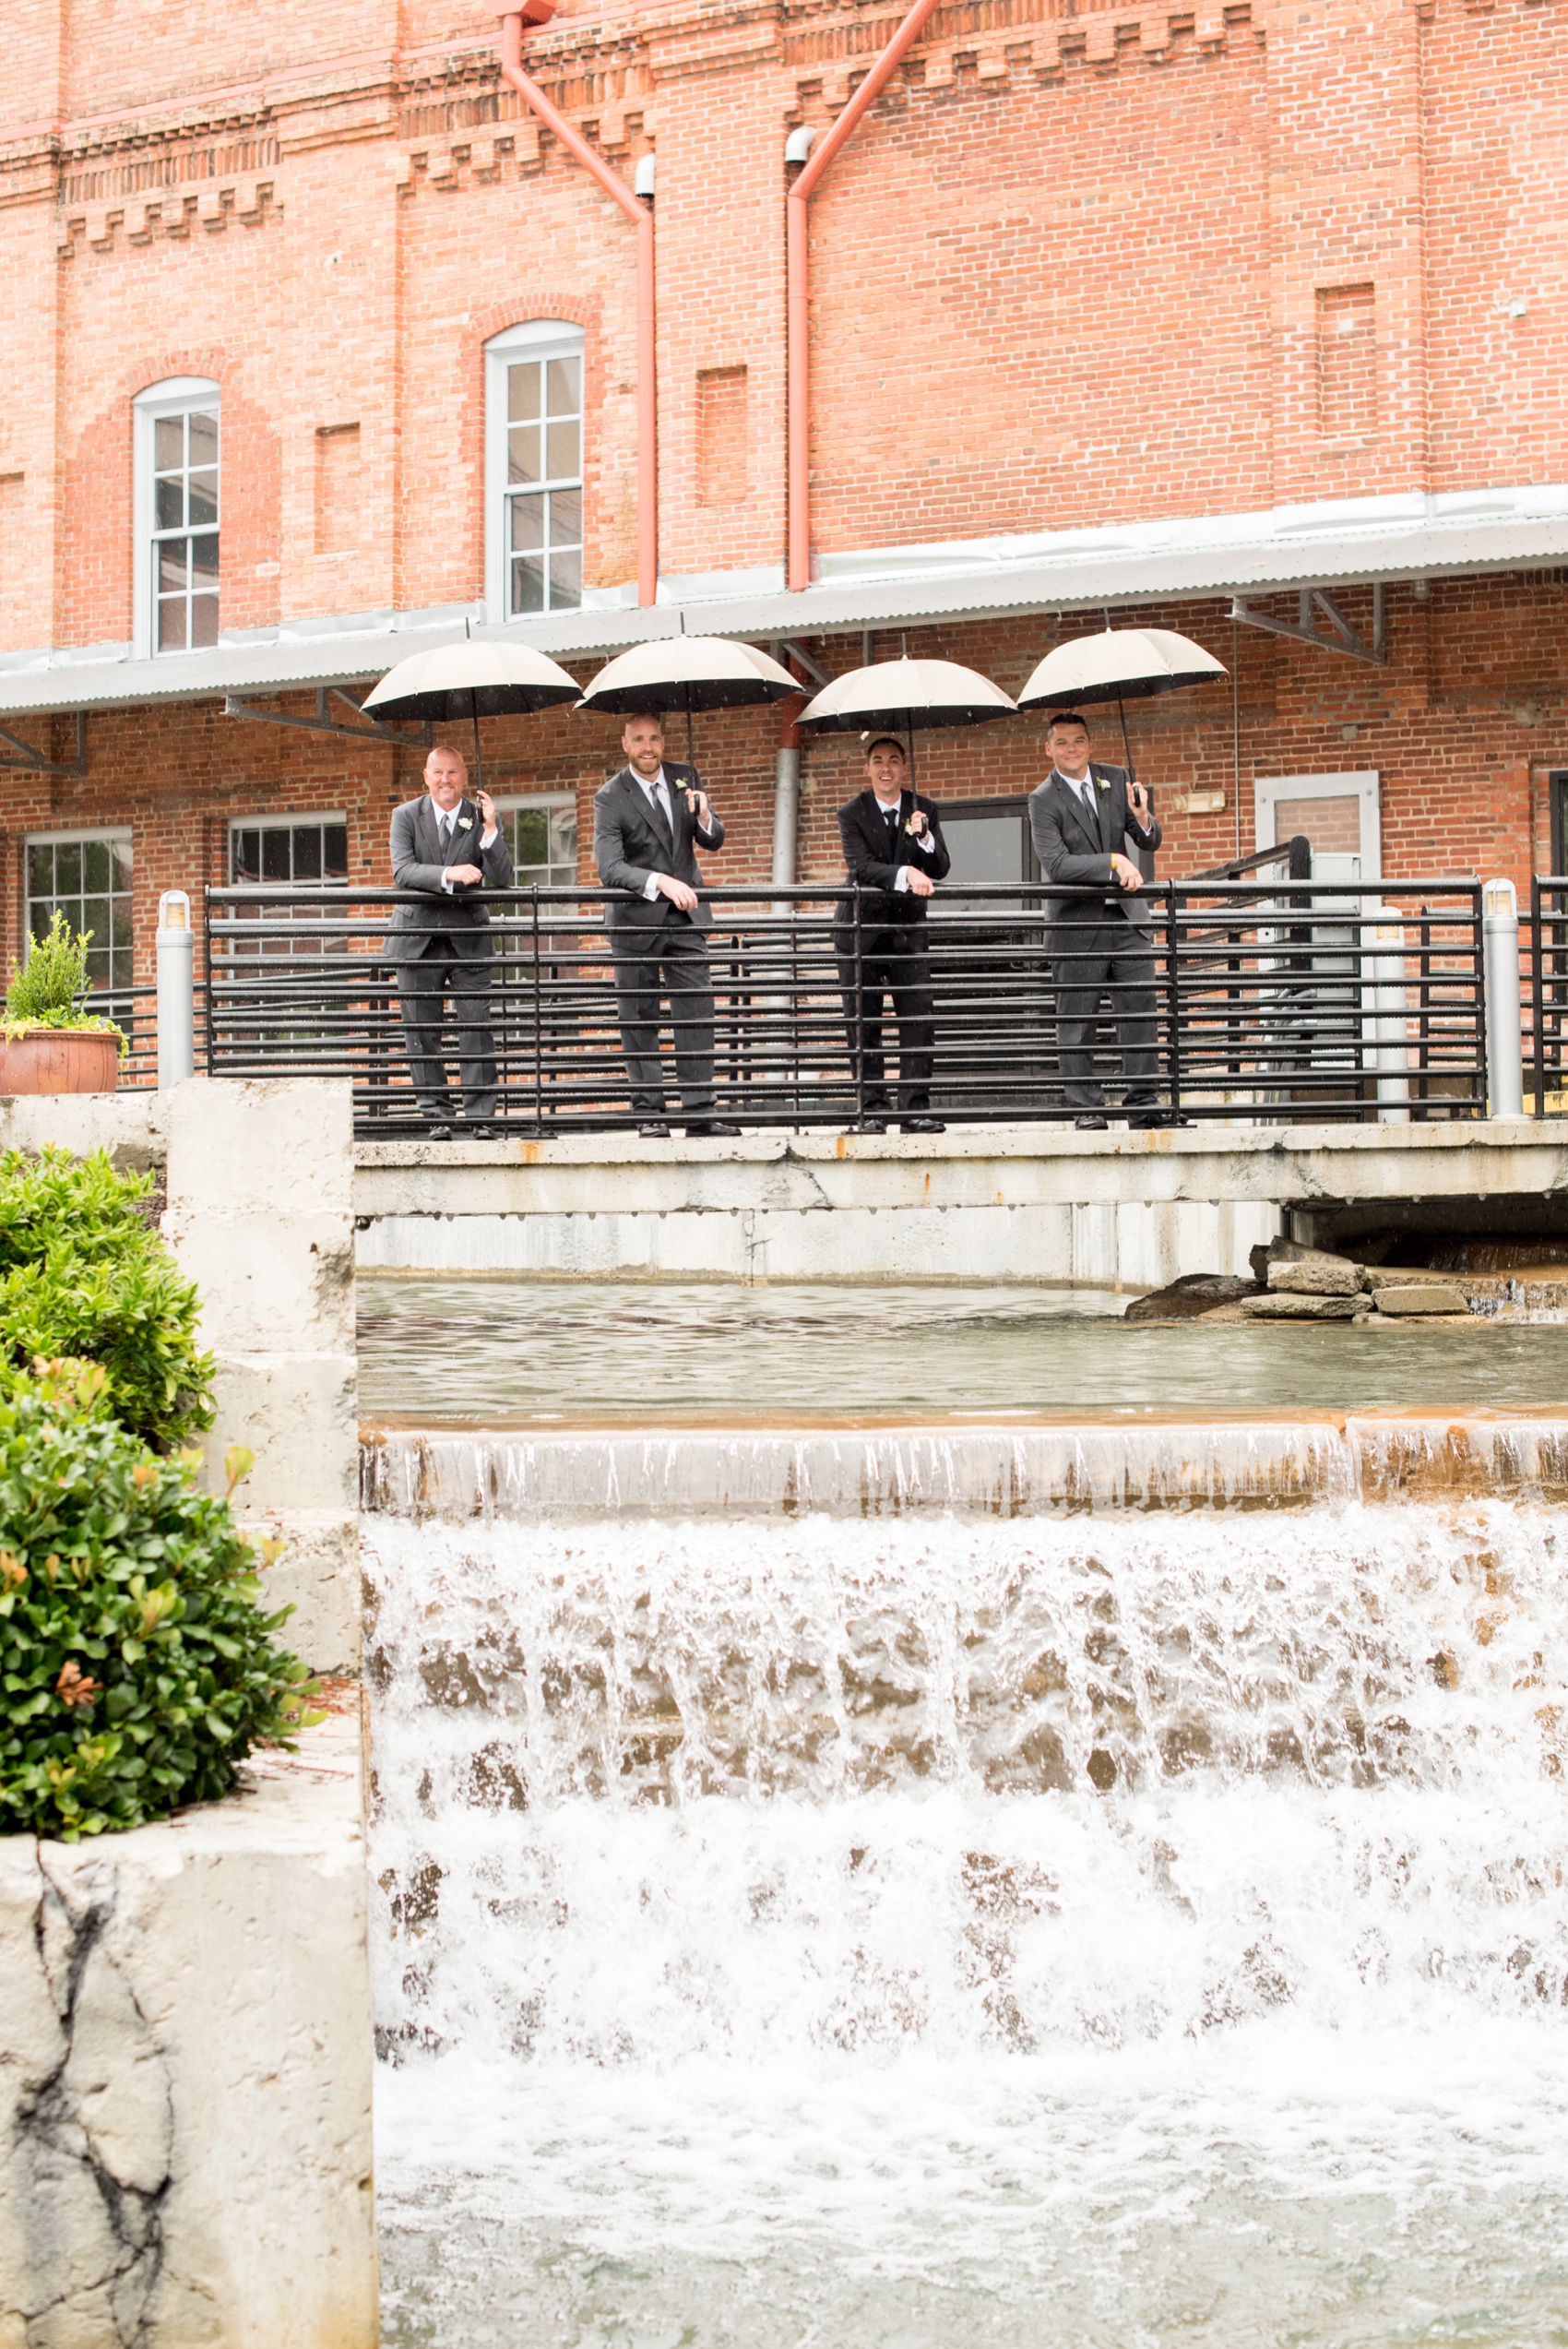 Bay 7 wedding photos by Mikkel Paige Photography. Raleigh wedding photographer captures the groomsmen in the rain with umbrellas.